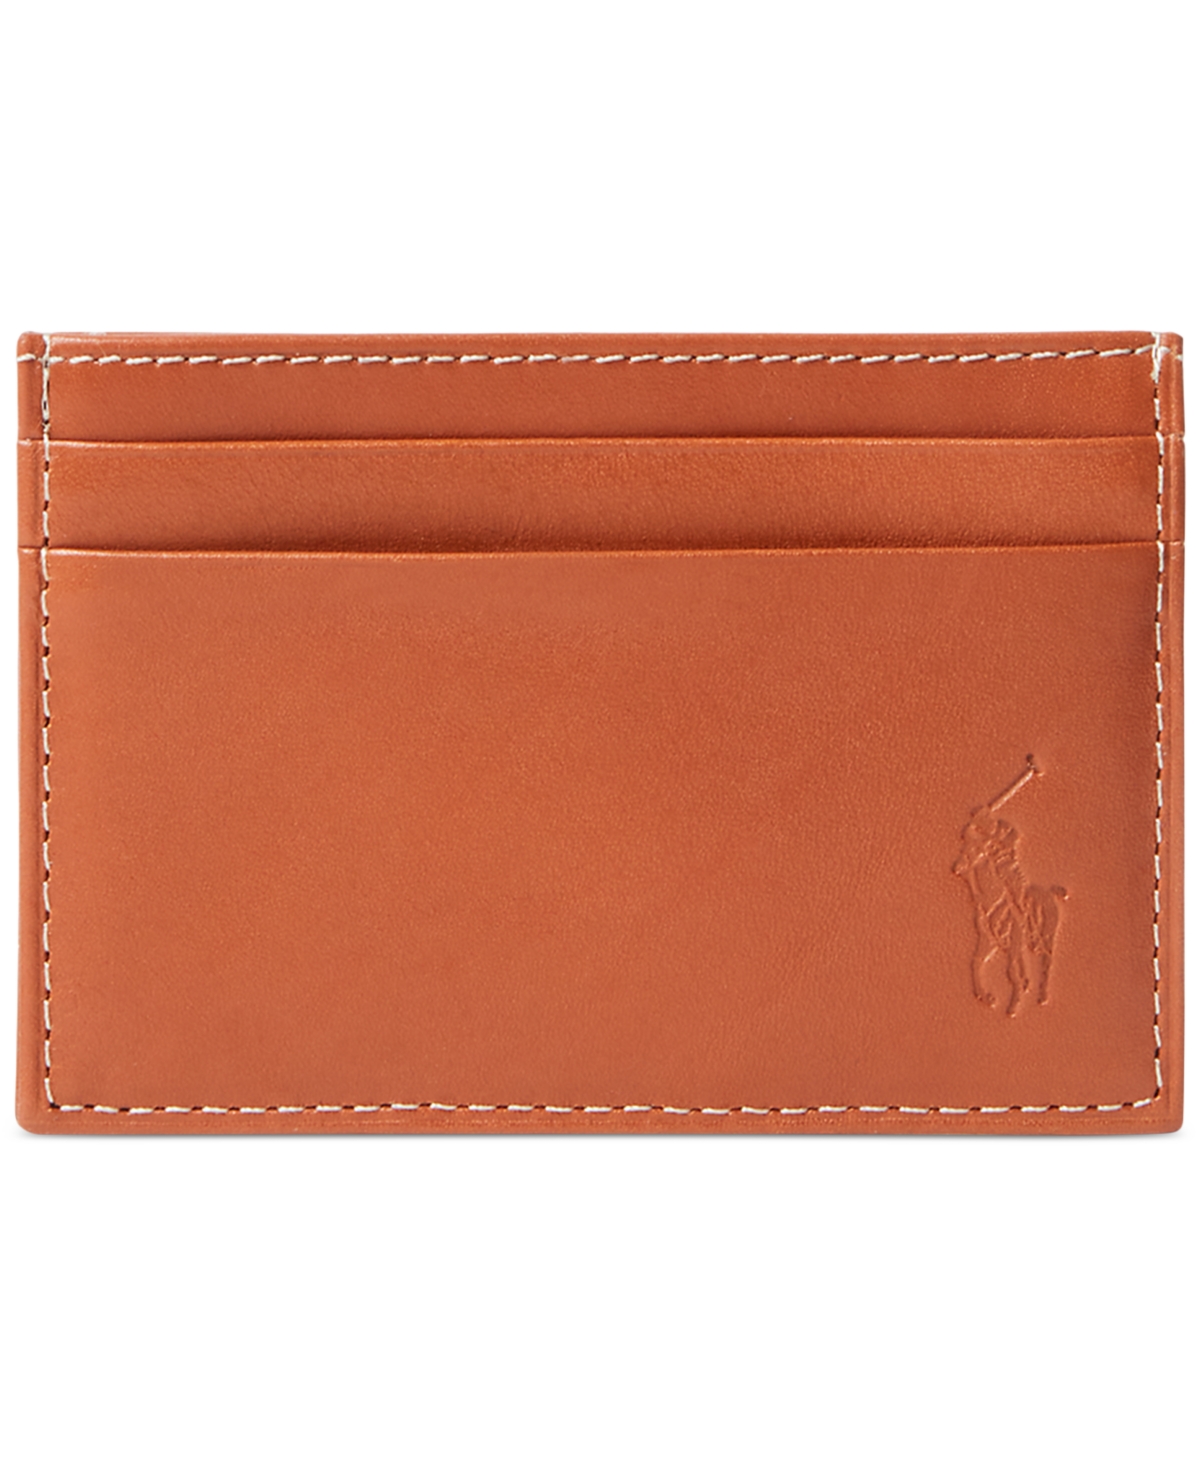 Polo Ralph Lauren Men's Burnished Leather Card Case & Money Clip In Brown